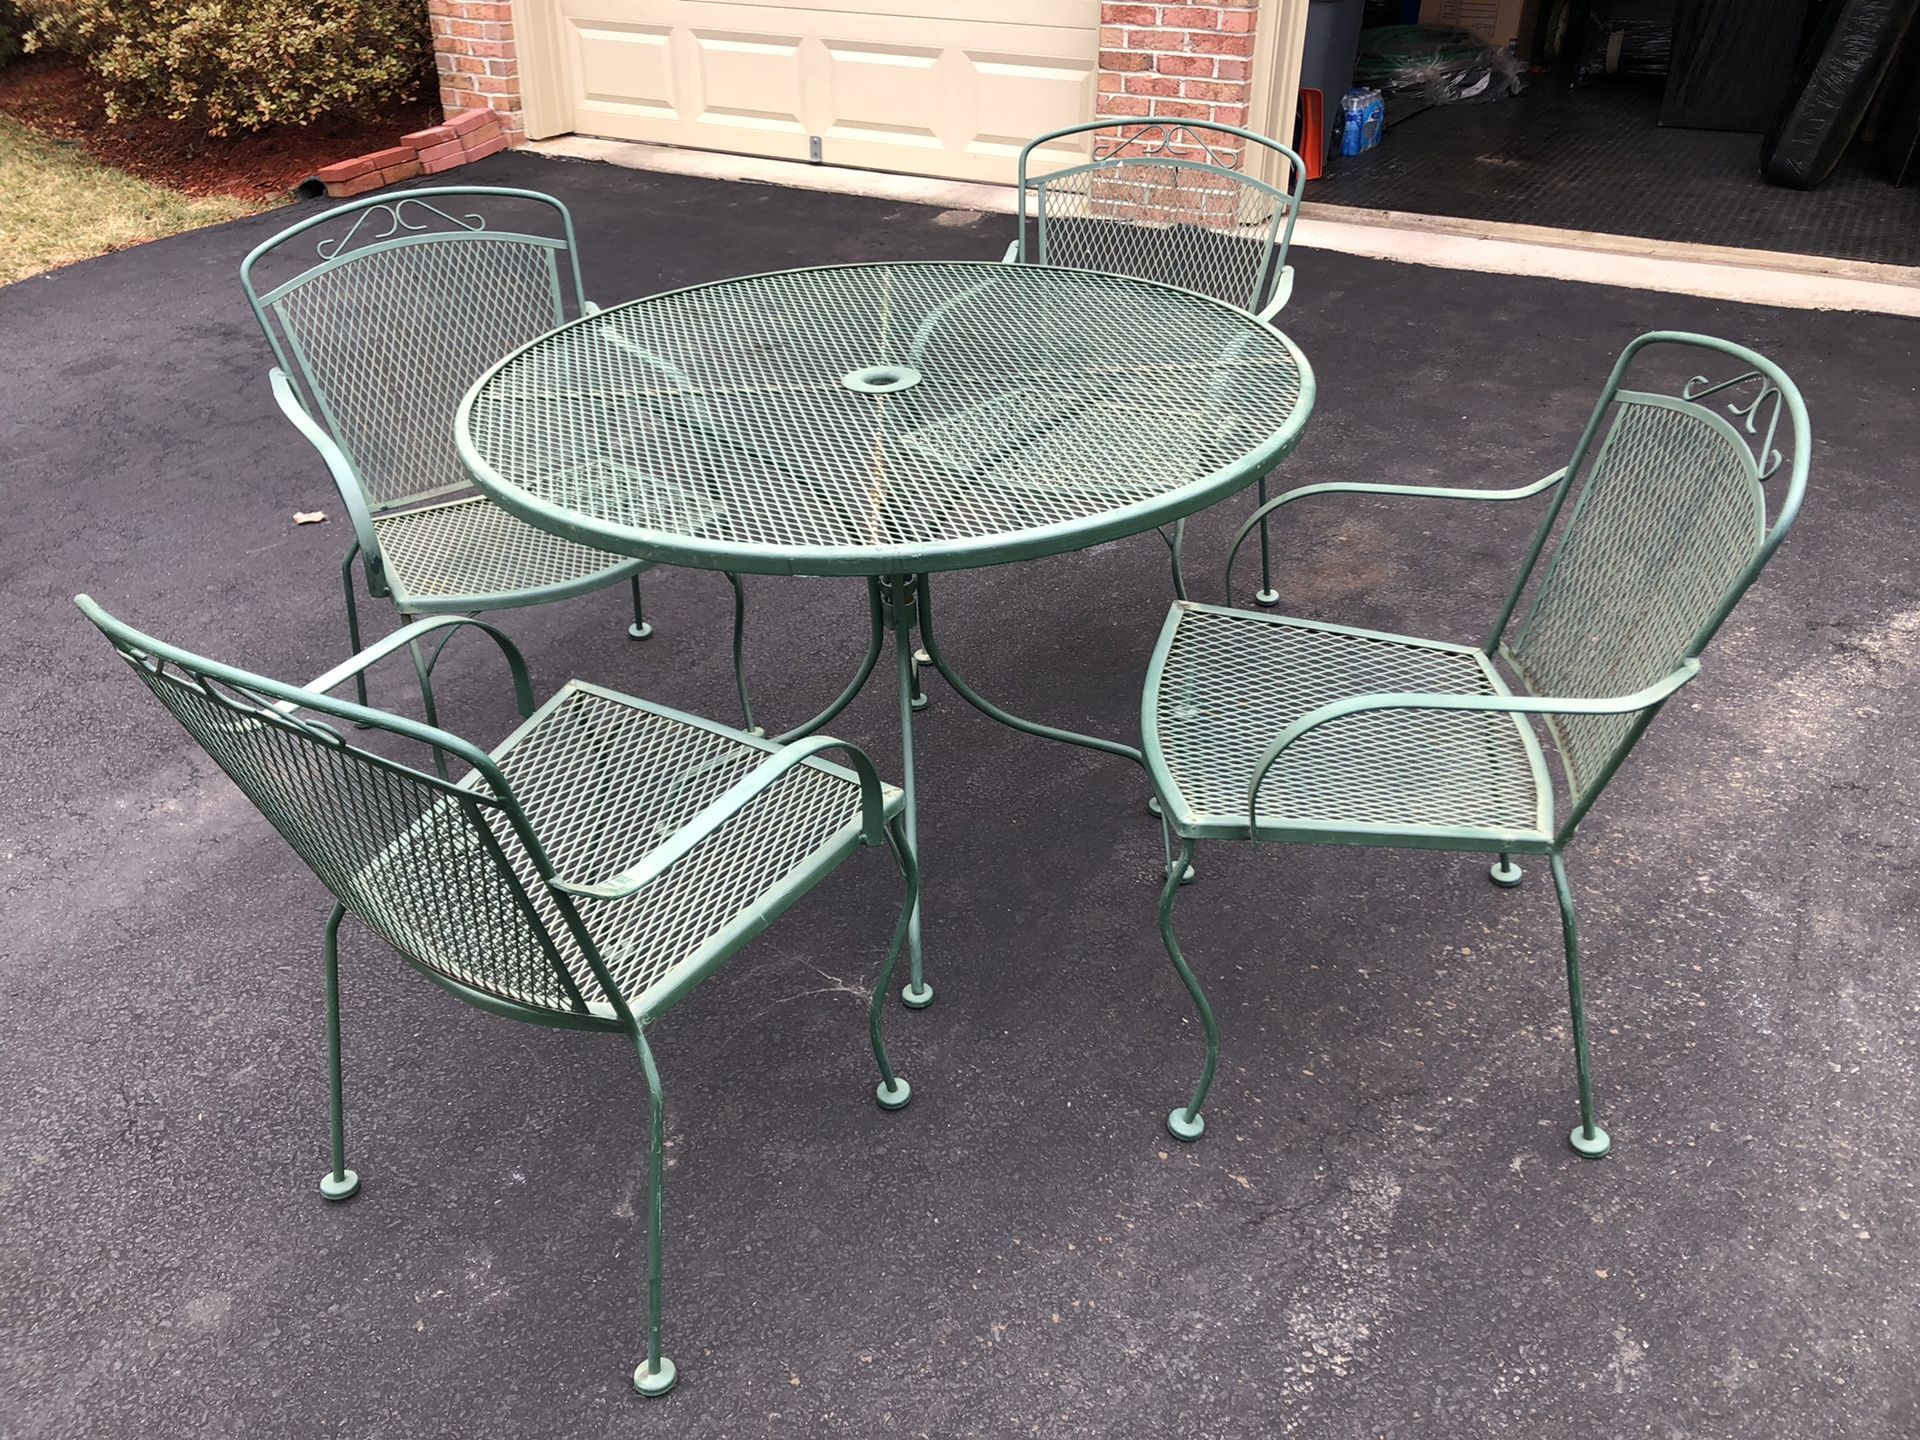 Patio furniture set (table with 4 chairs)